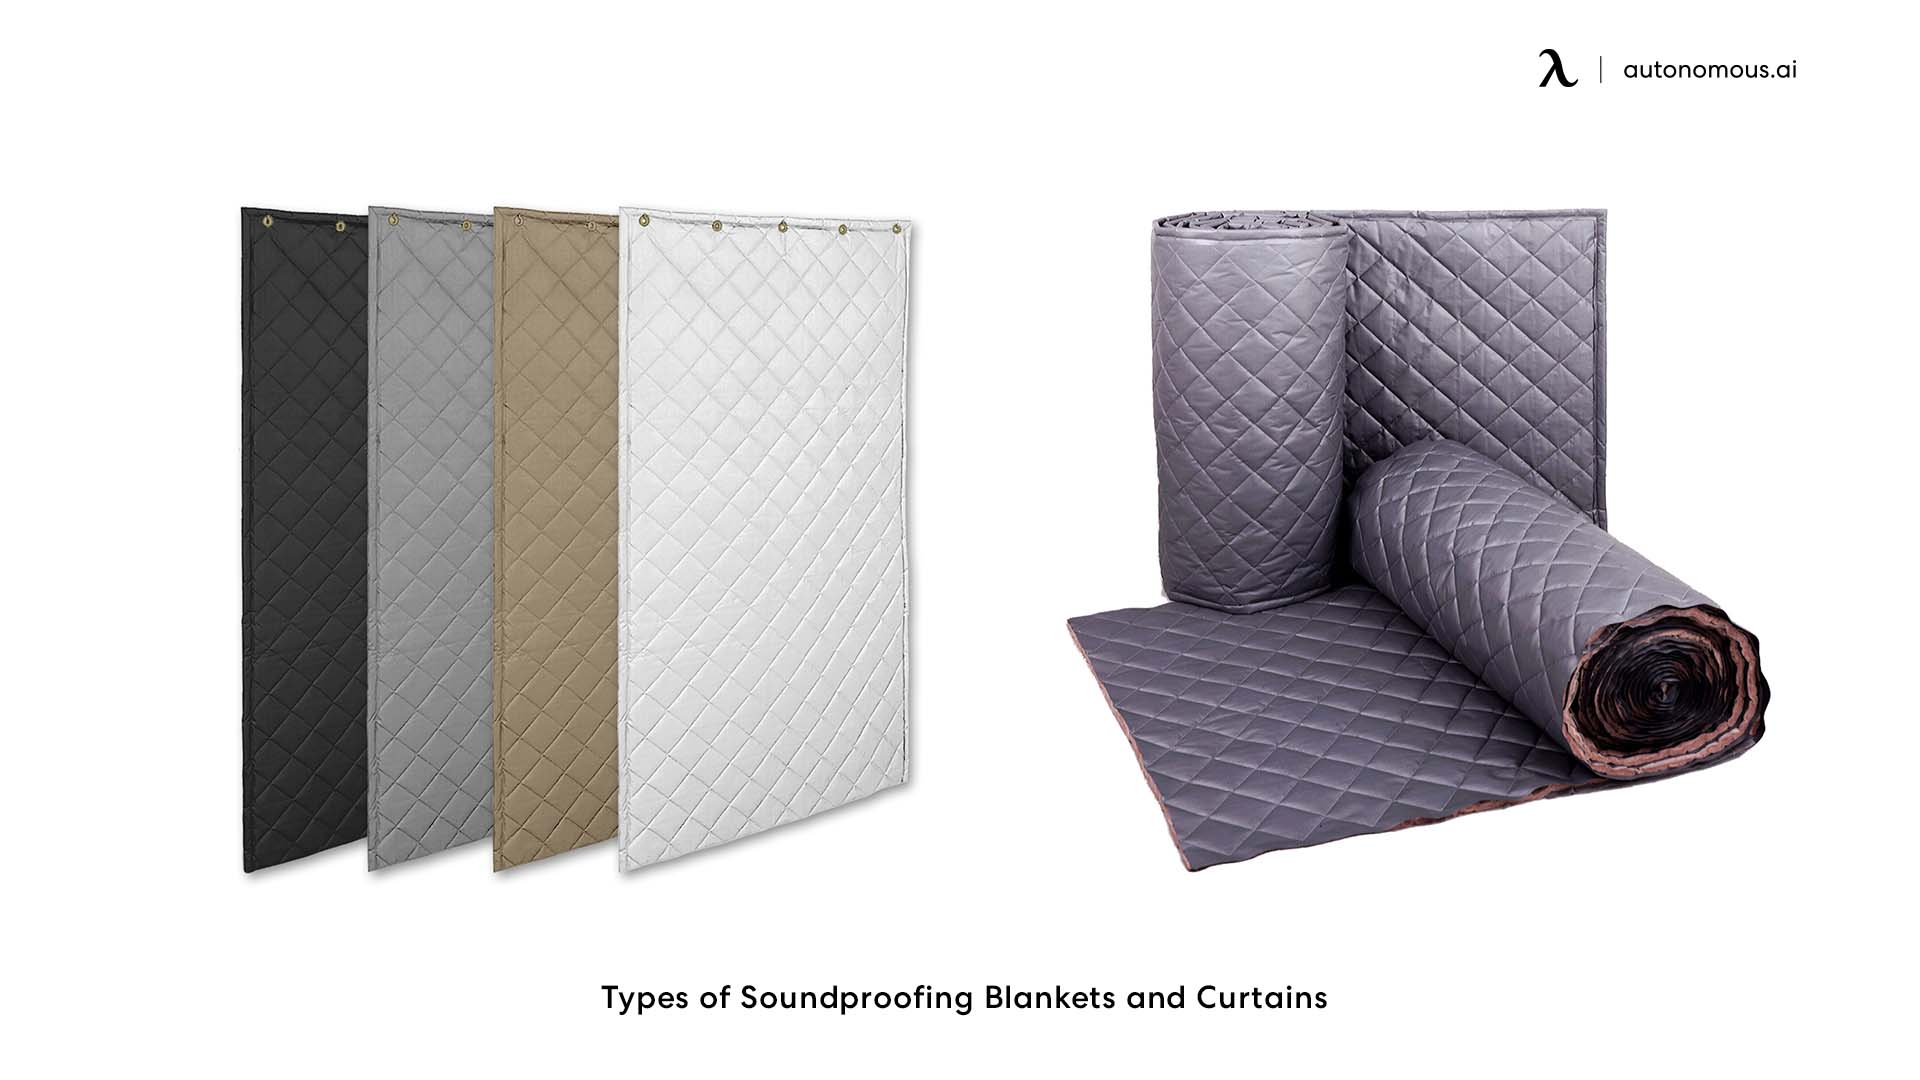 Soundproofing Blankets and Curtains